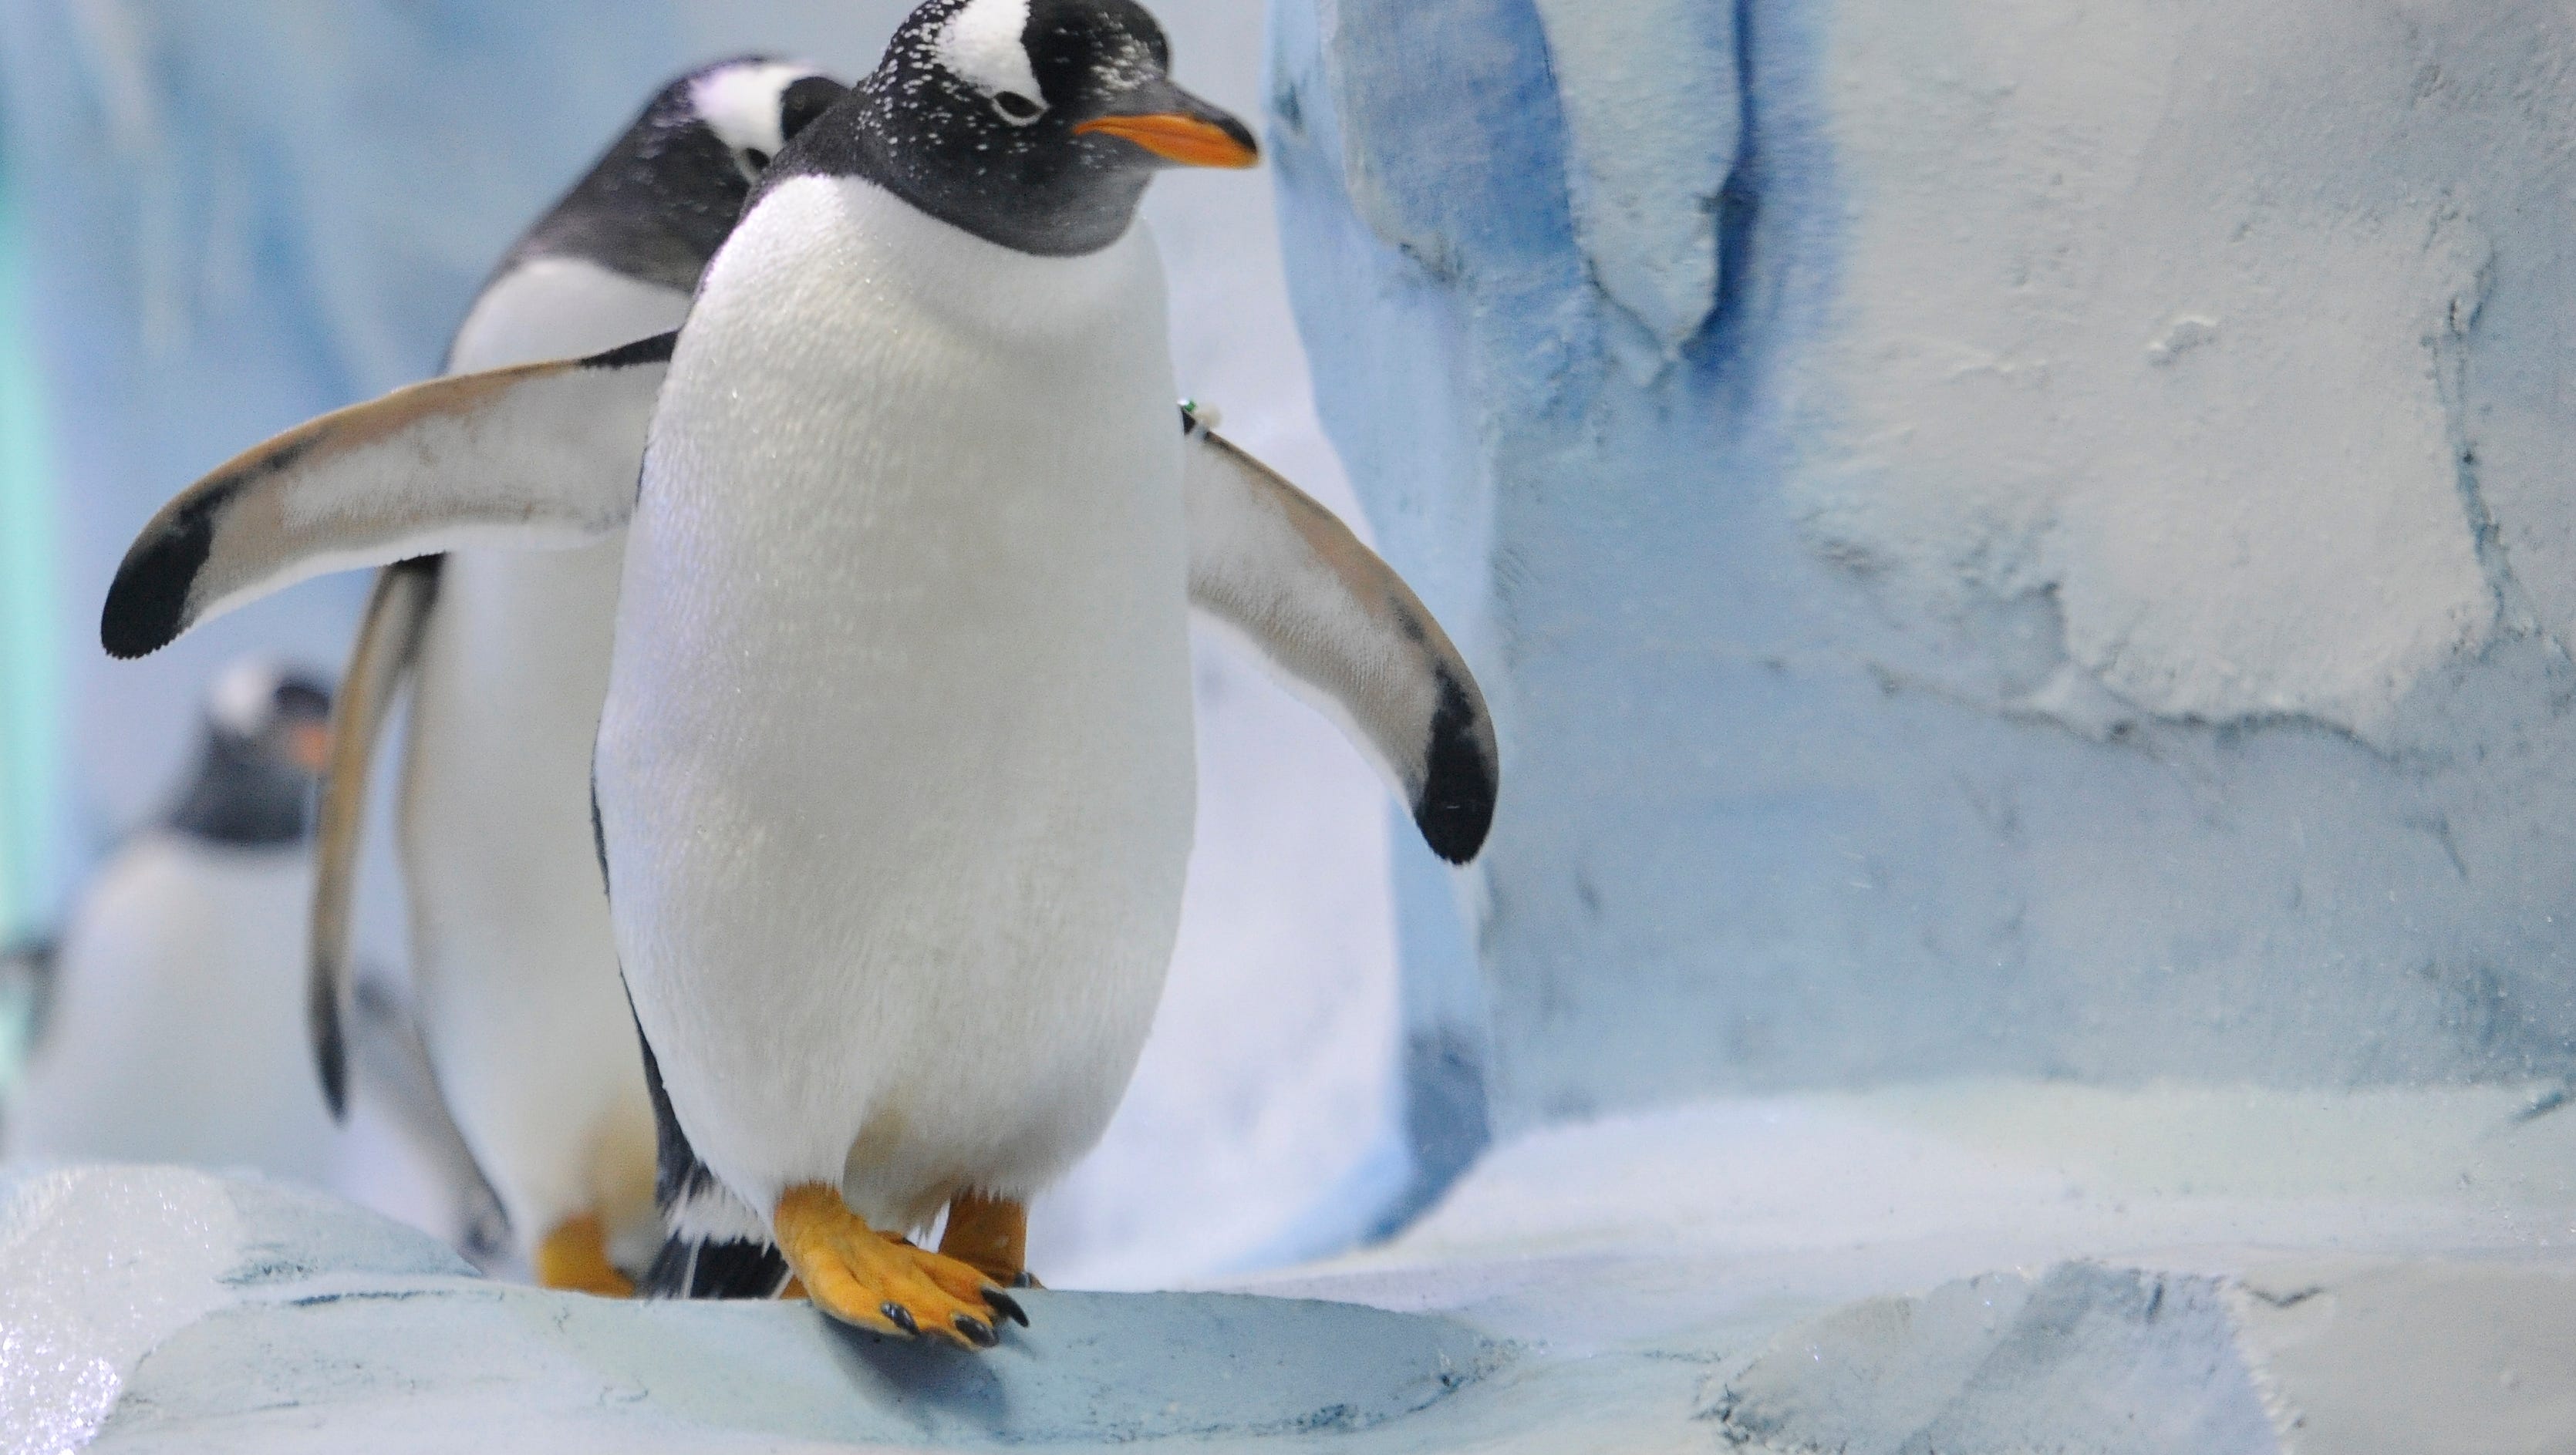 An April 13 media preview preceded the public opening on April 18 of the Polk Penguin Conservation Center at the Detroit Zoo in Royal Oak.